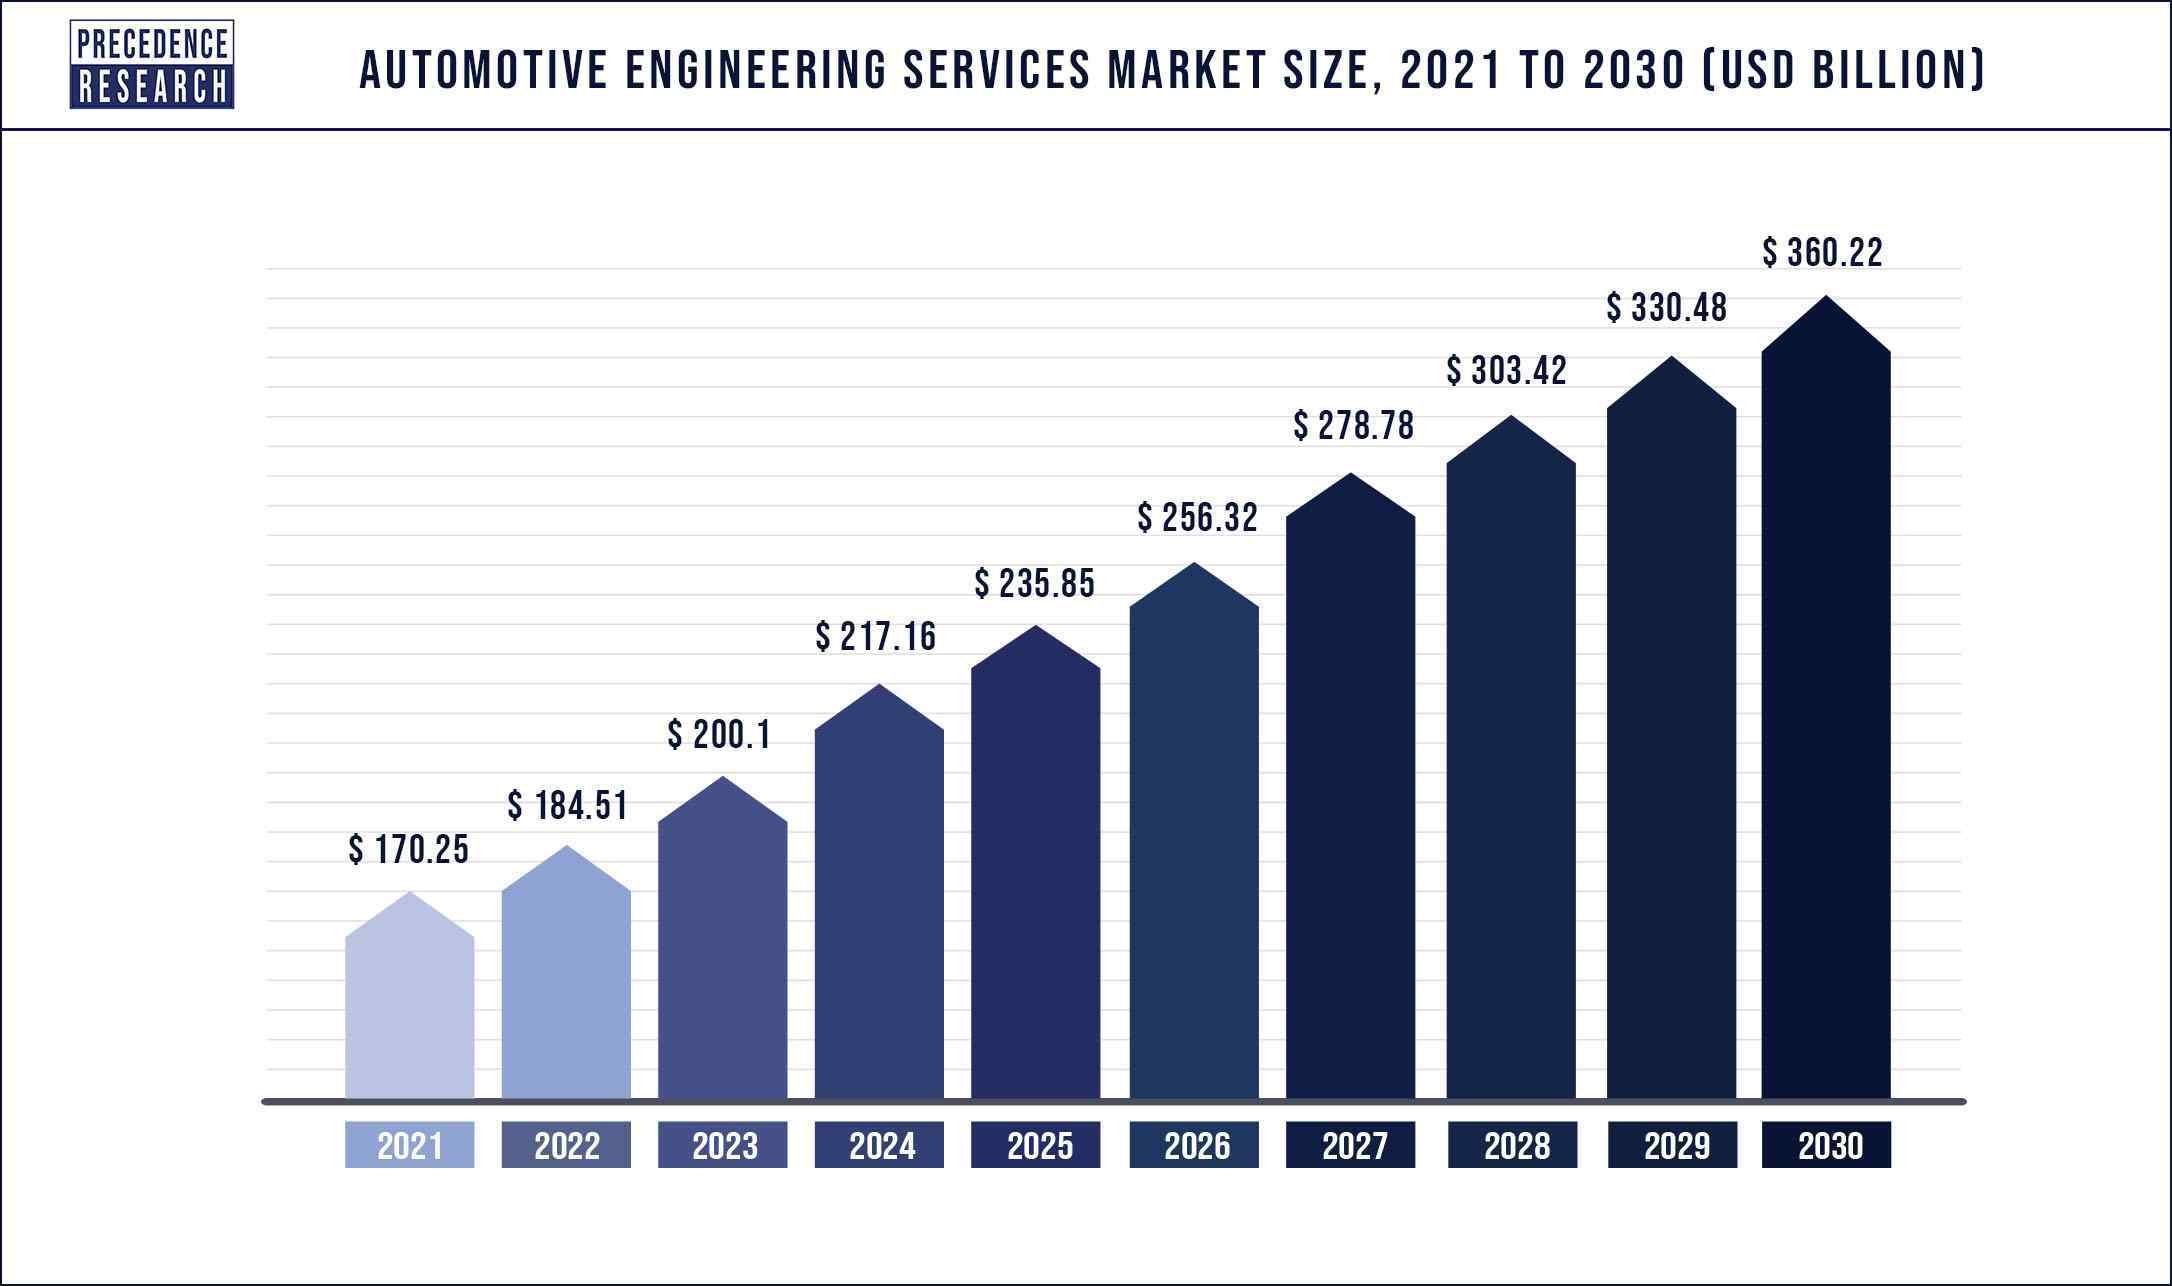 Automotive Engineering Services Market Size 2021 to 2030